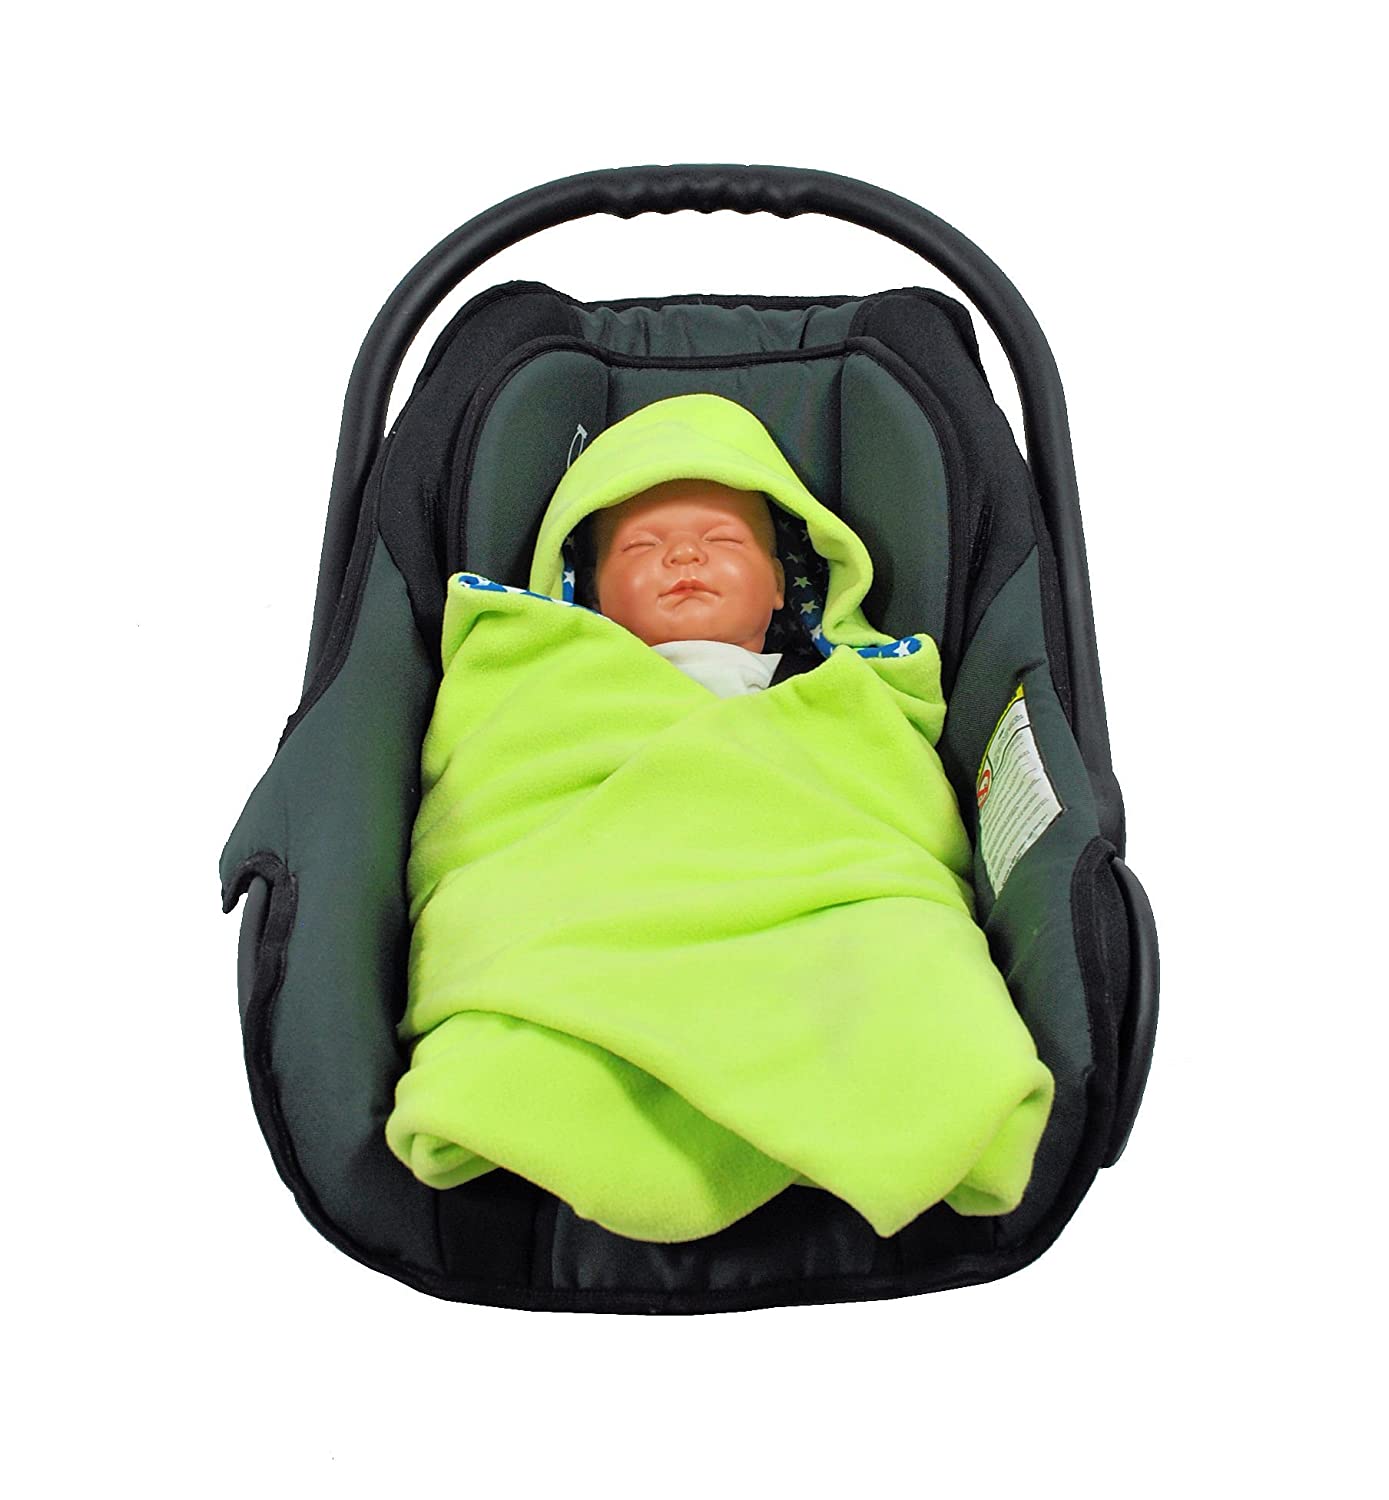 Hobea car Seat Swaddling Blanket with Footmuff for Colder Days, Various Col